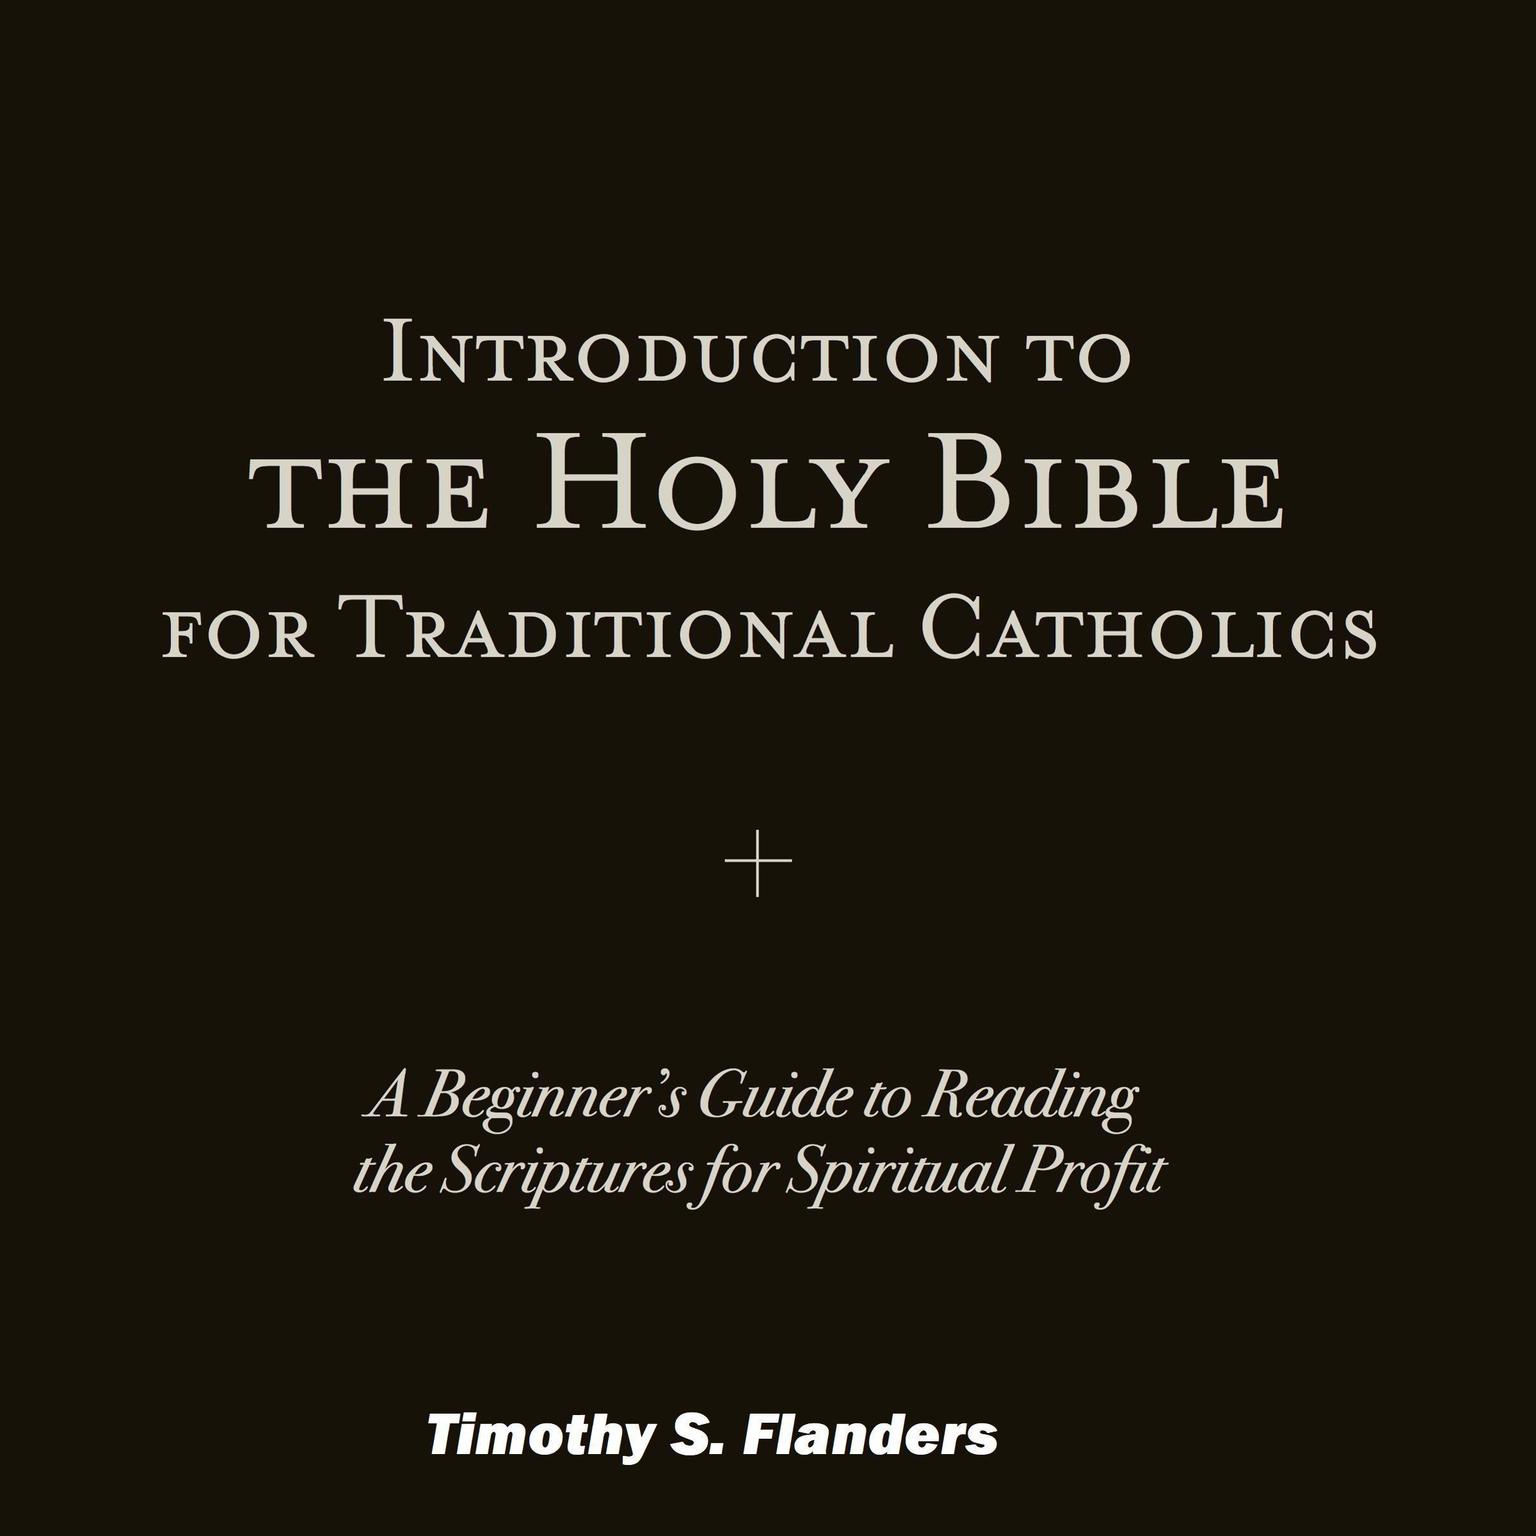 Introduction to the Holy Bible for Traditional Catholics Audiobook, by Timothy S. Flanders